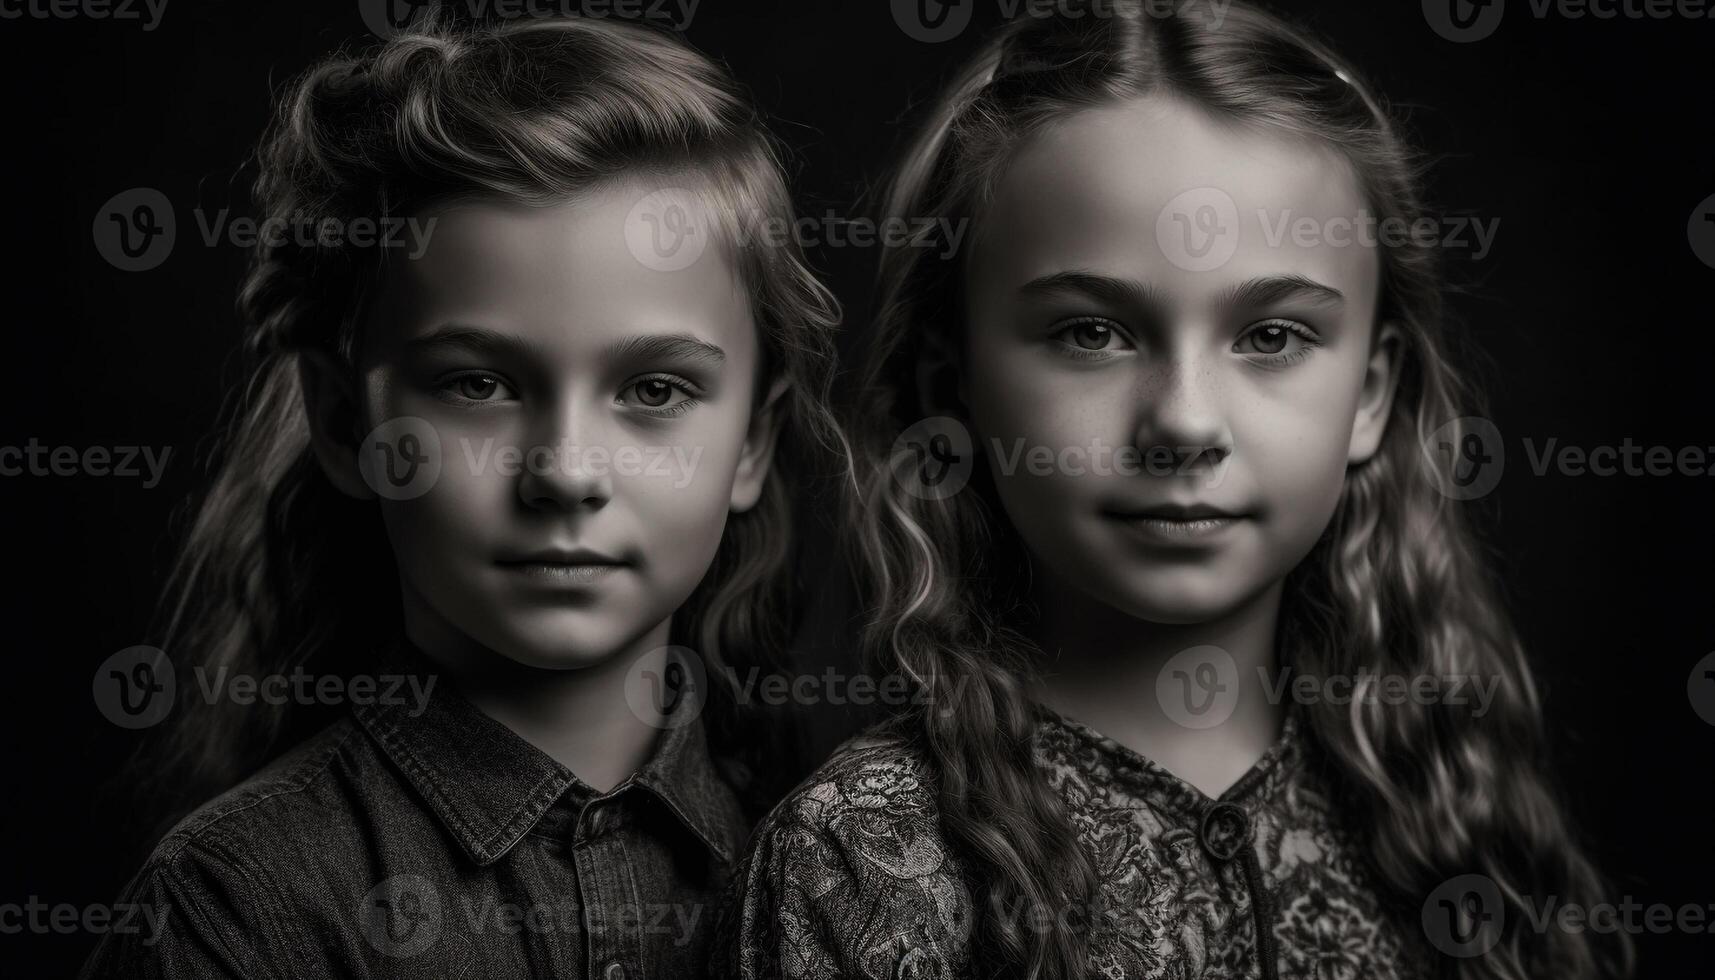 Smiling siblings exude innocence and love in monochrome portrait generated by AI photo